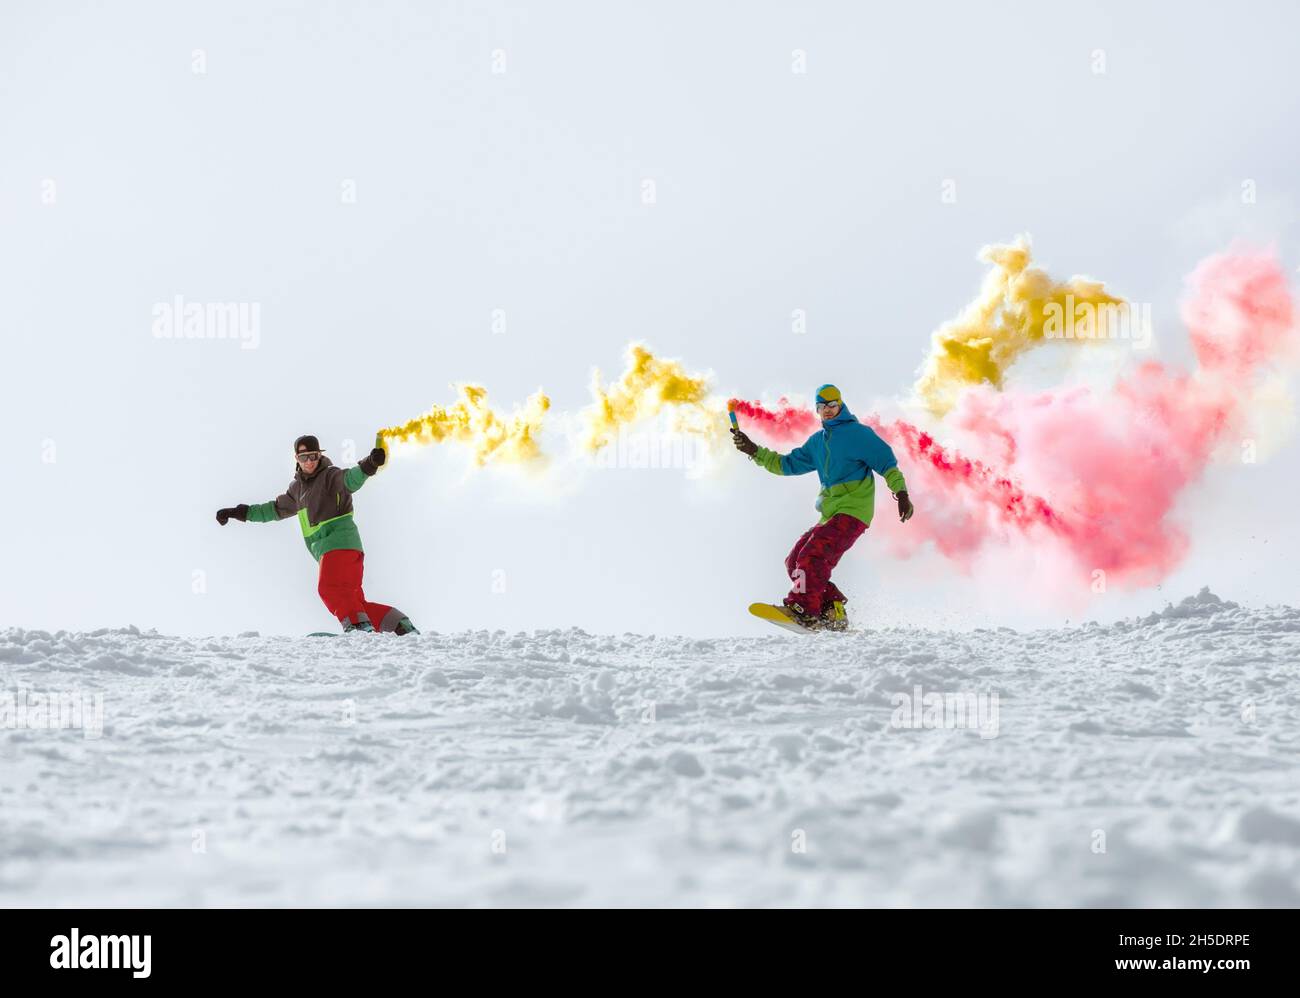 Two friends snowboarders are having fun with smoke torch at ski slope. Winter sports concept Stock Photo